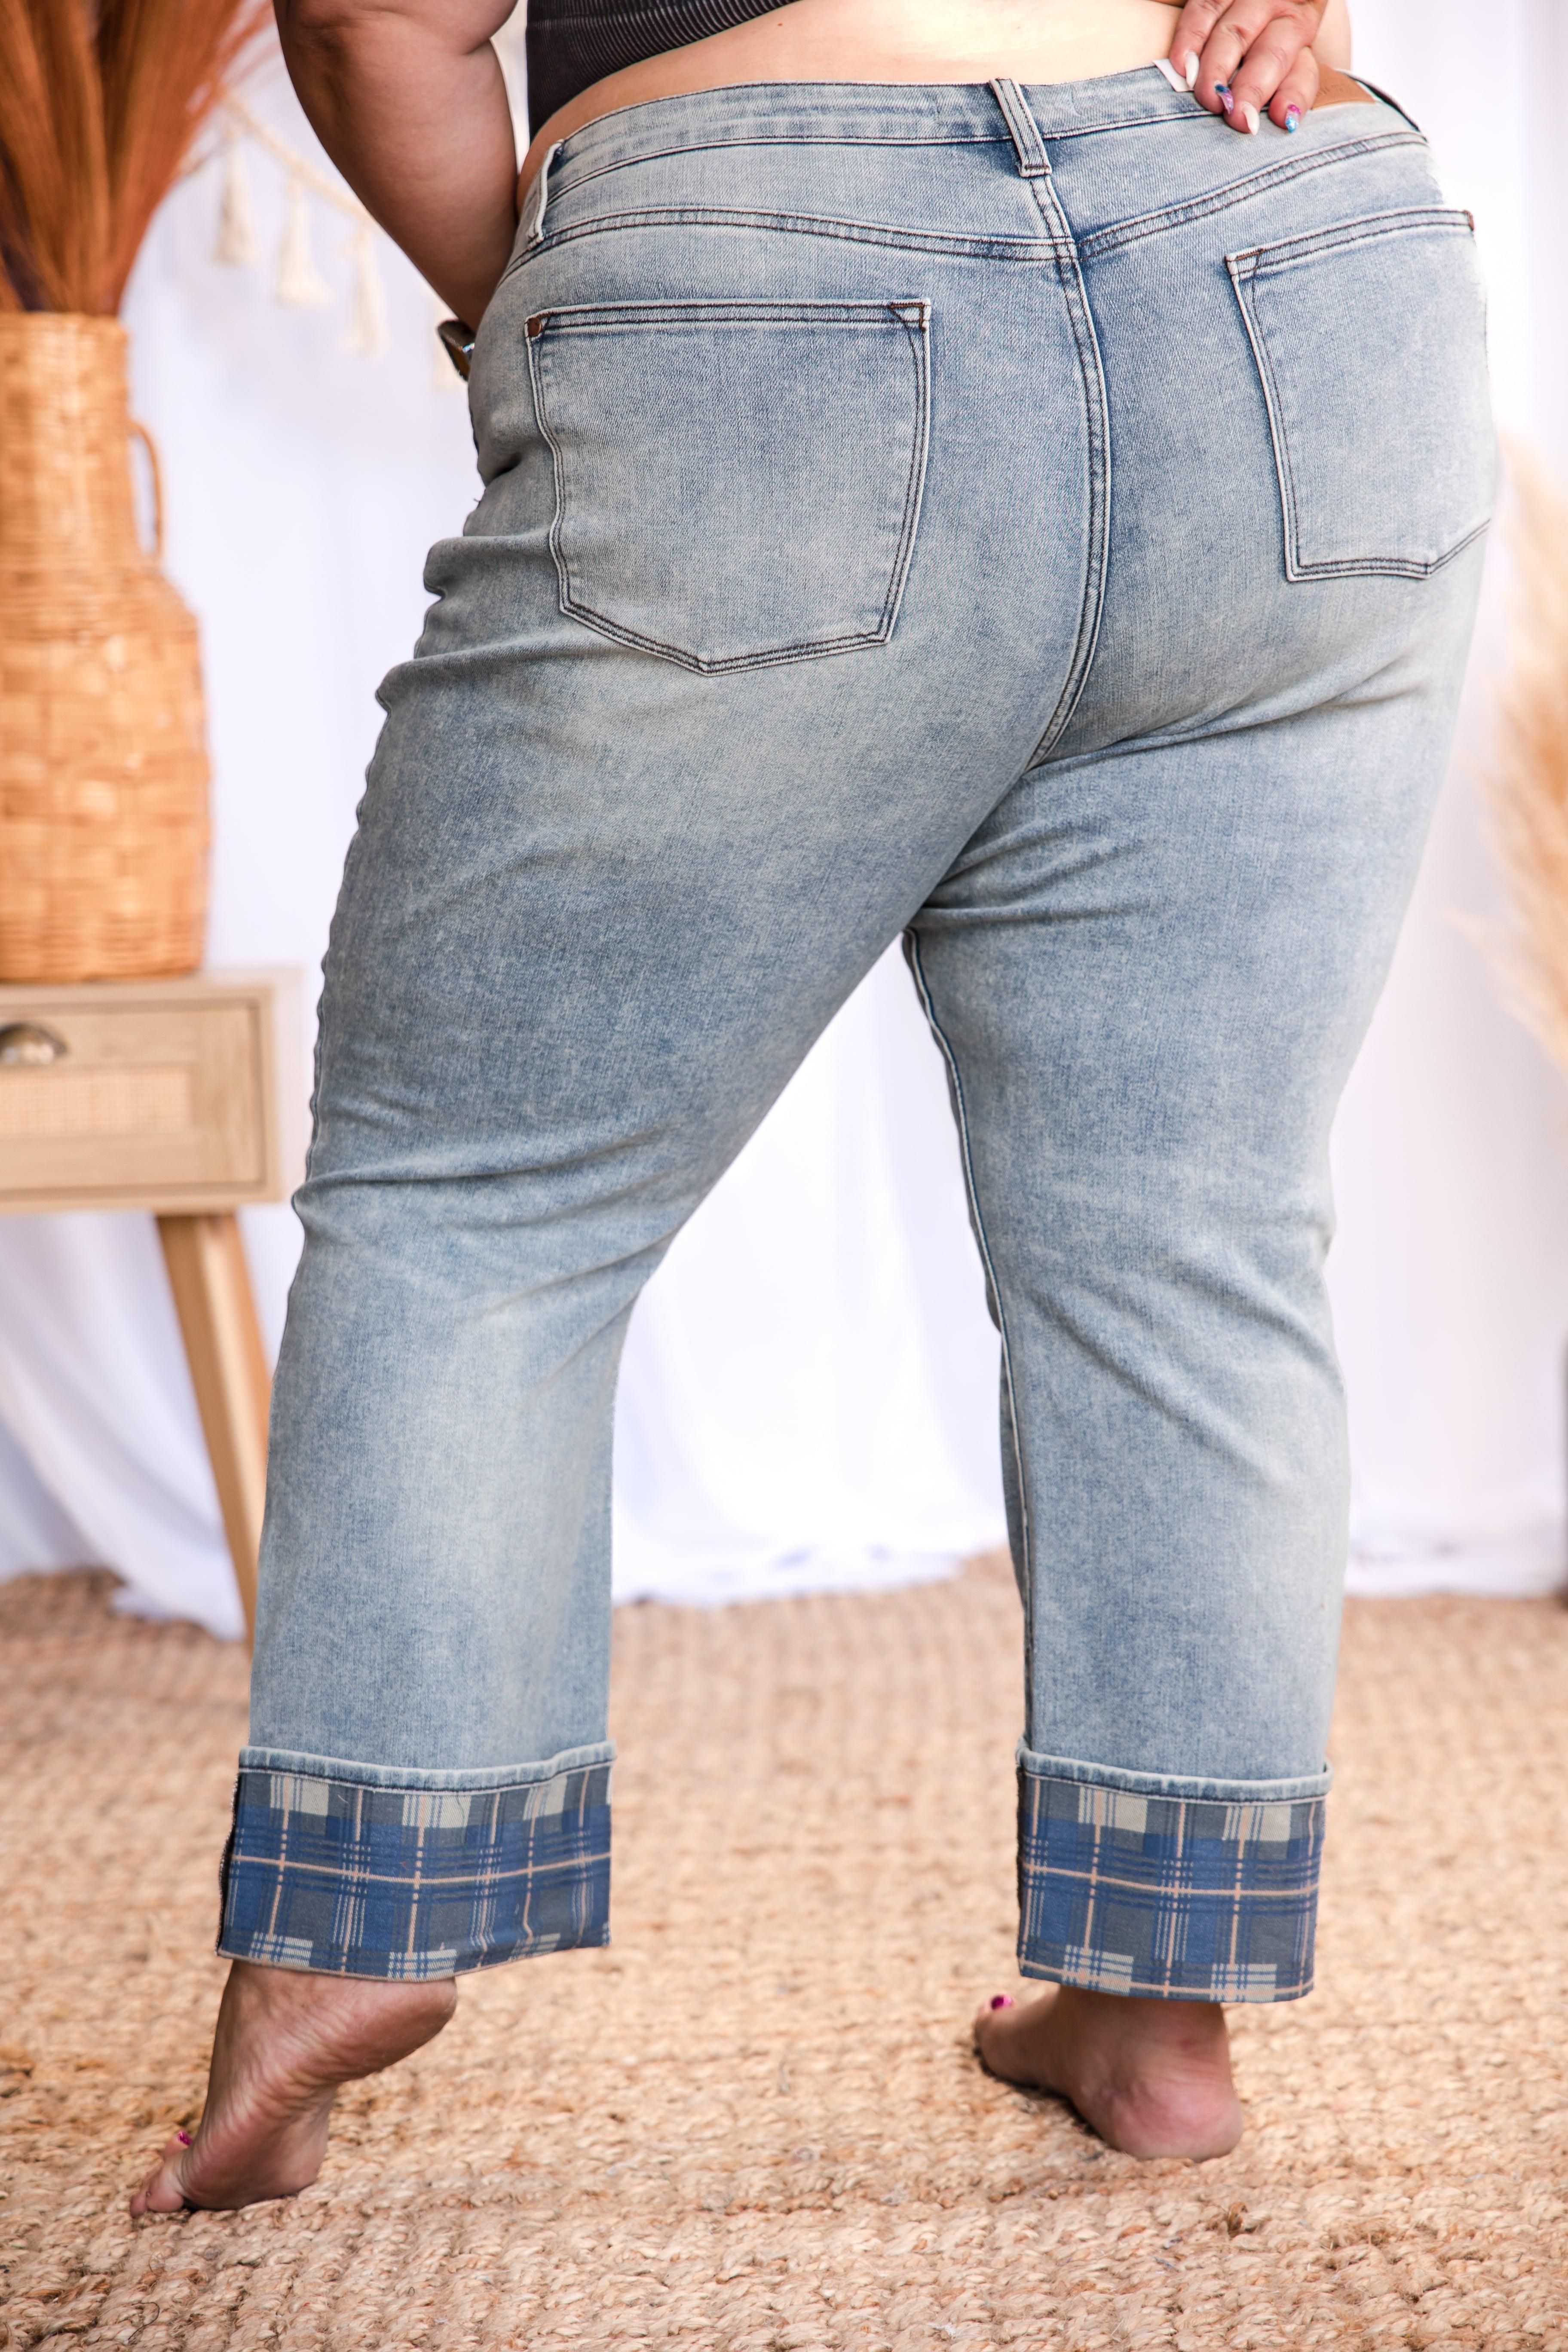 Touch of Plaid - Judy Blue Jeans Giftmas Boutique Simplified   